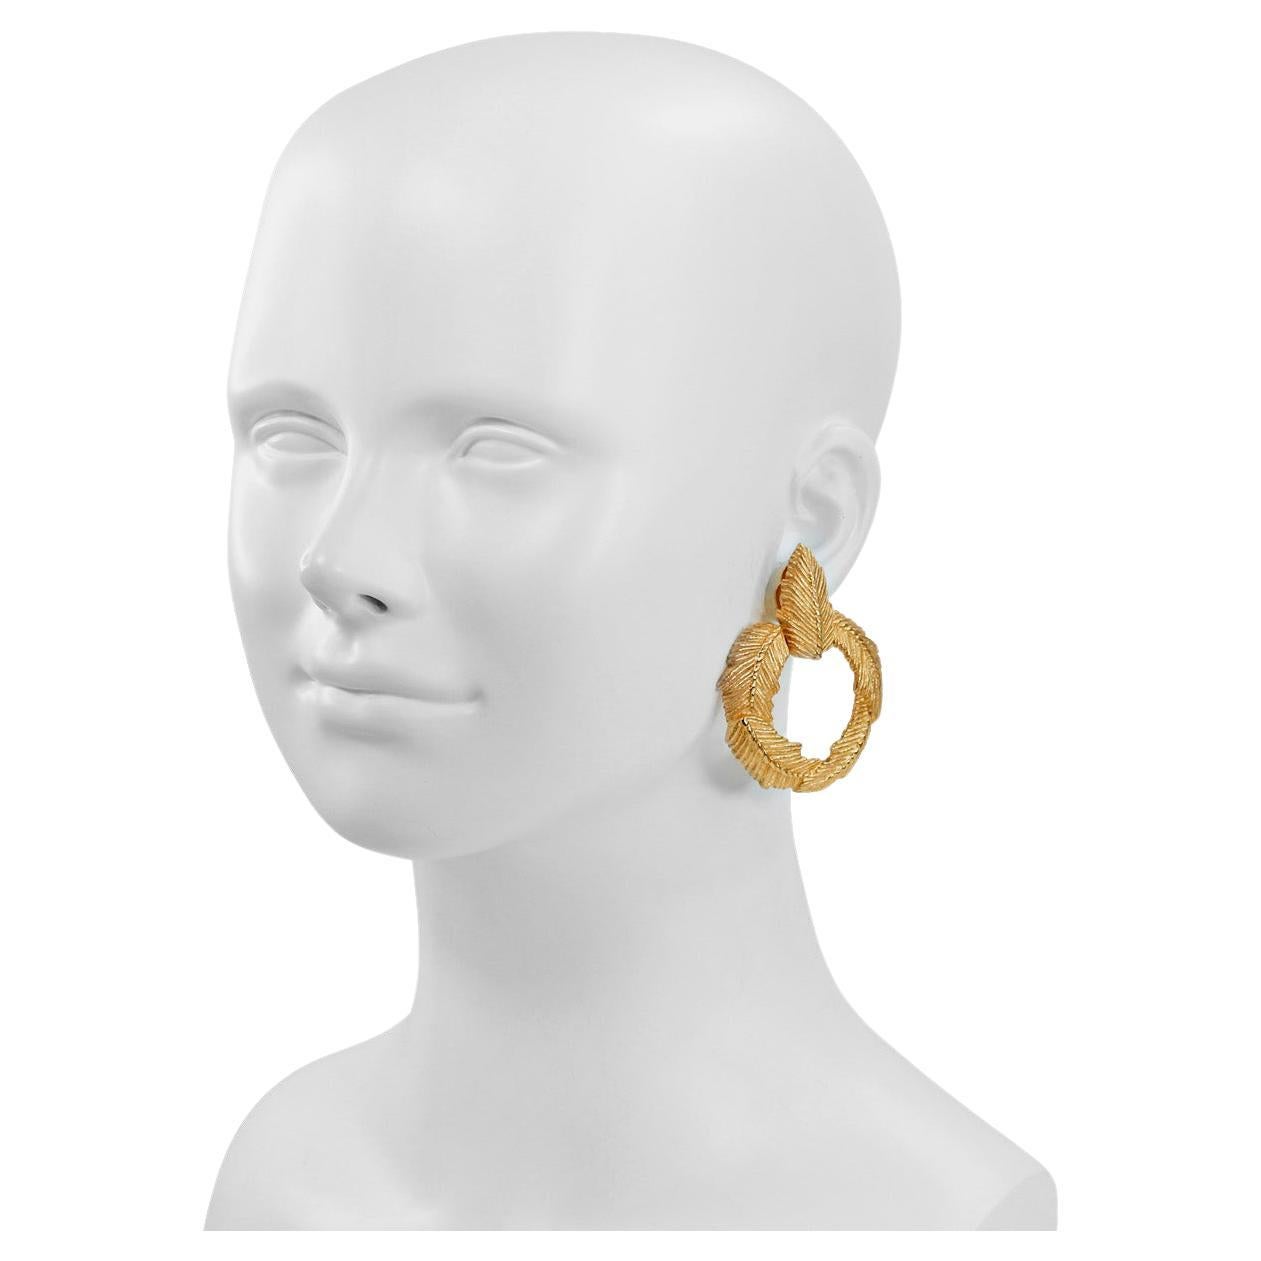 Vintage Givenchy Gold Tone Feather Like Front Facing Hoop Earrings.  Clip On. There is a Necklace on Site as well that matches.

Again, I say these are the sleeper earrings but when you see them on they are wow. Front facing so they make a